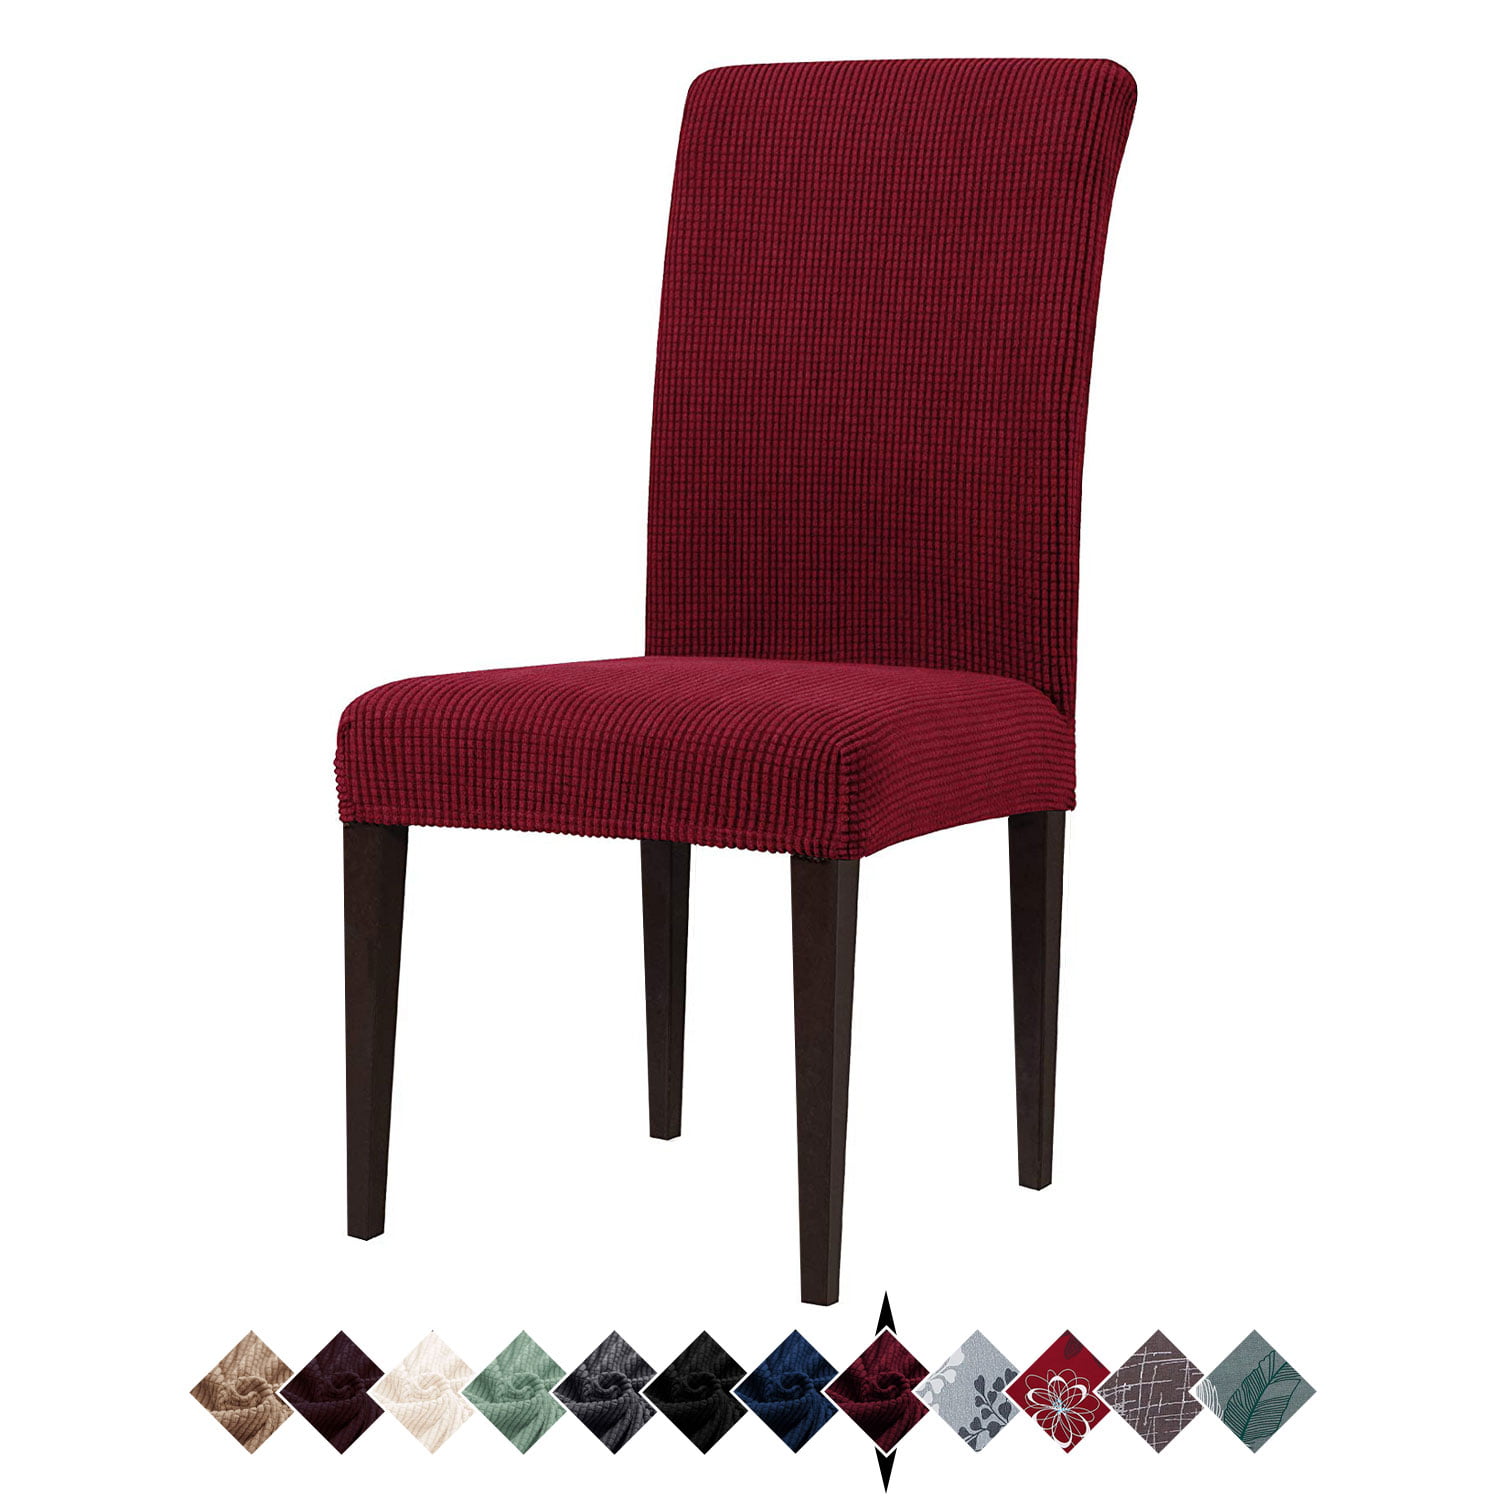 Howarmer Burgundy Stretch Dining Room Chair Covers, Set of 4 Removable  Washable Chair Furniture Protector Covers - Walmart.com